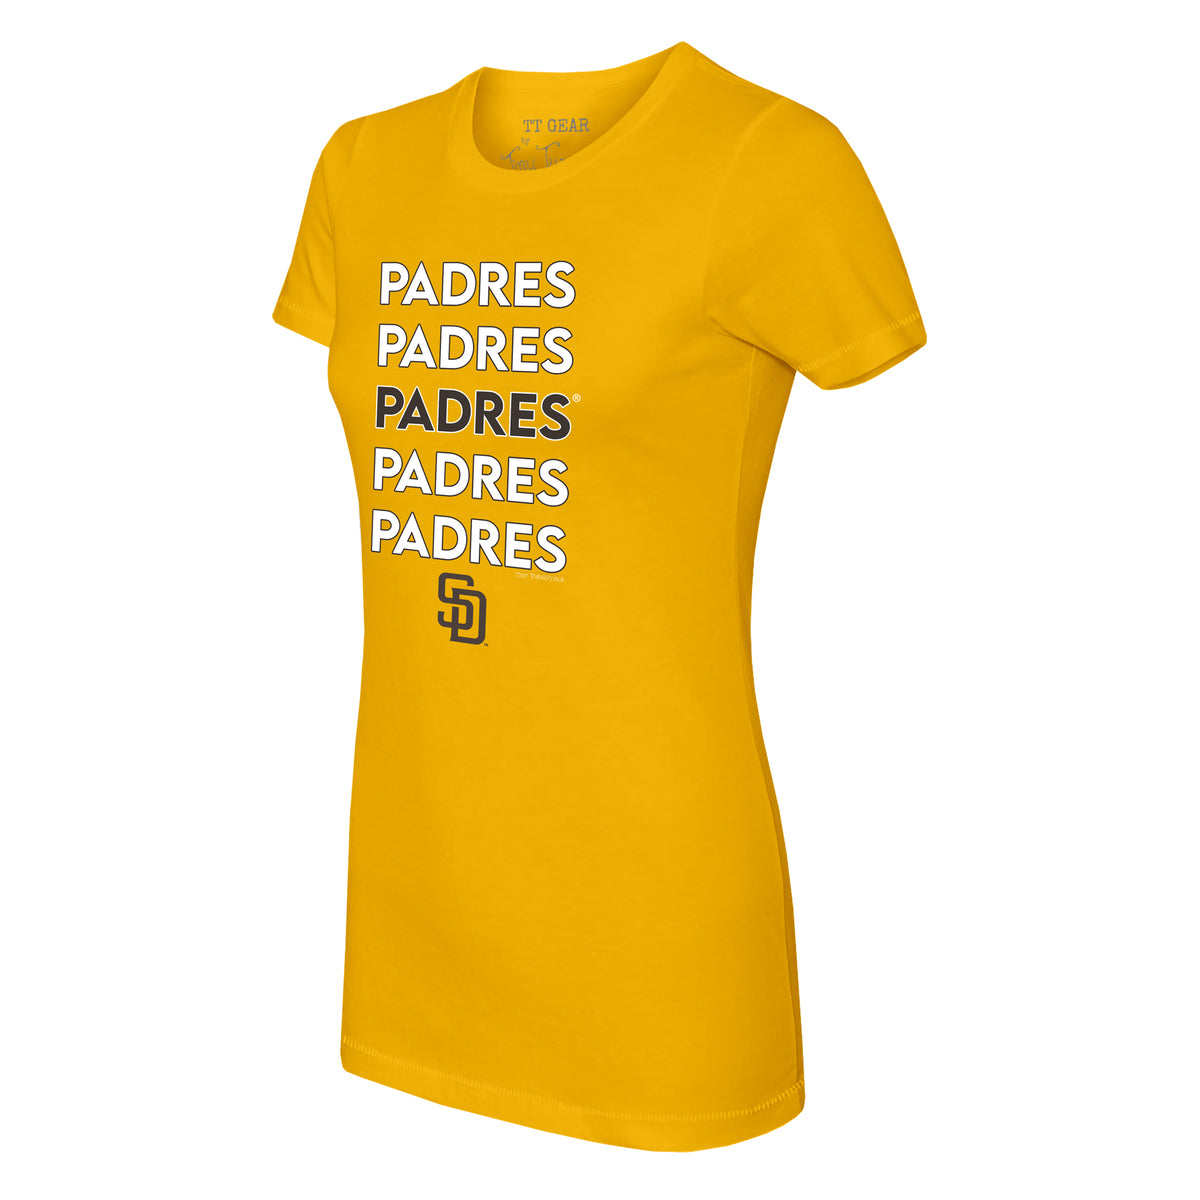 San Diego Padres Stacked Tee Shirt